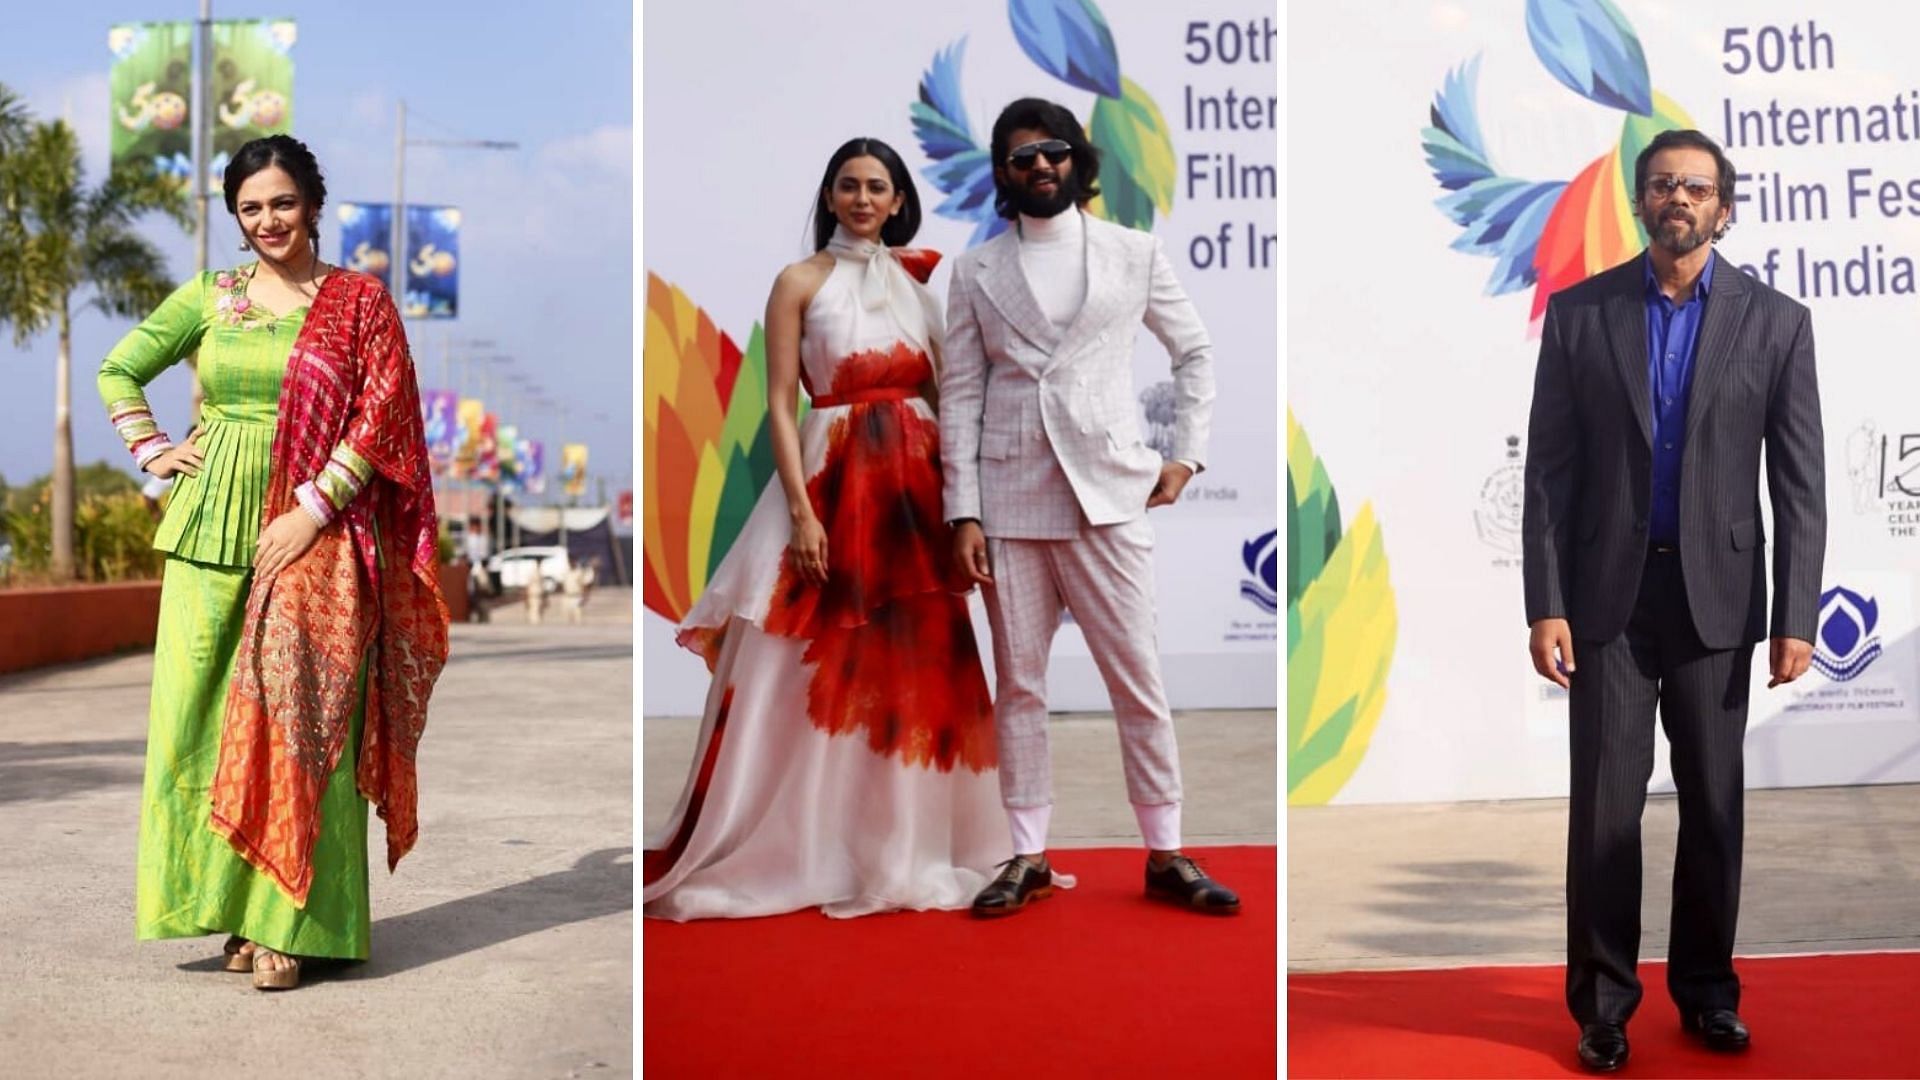 Celebrities attended the closing ceremony of IFFI 2019 in Goa.